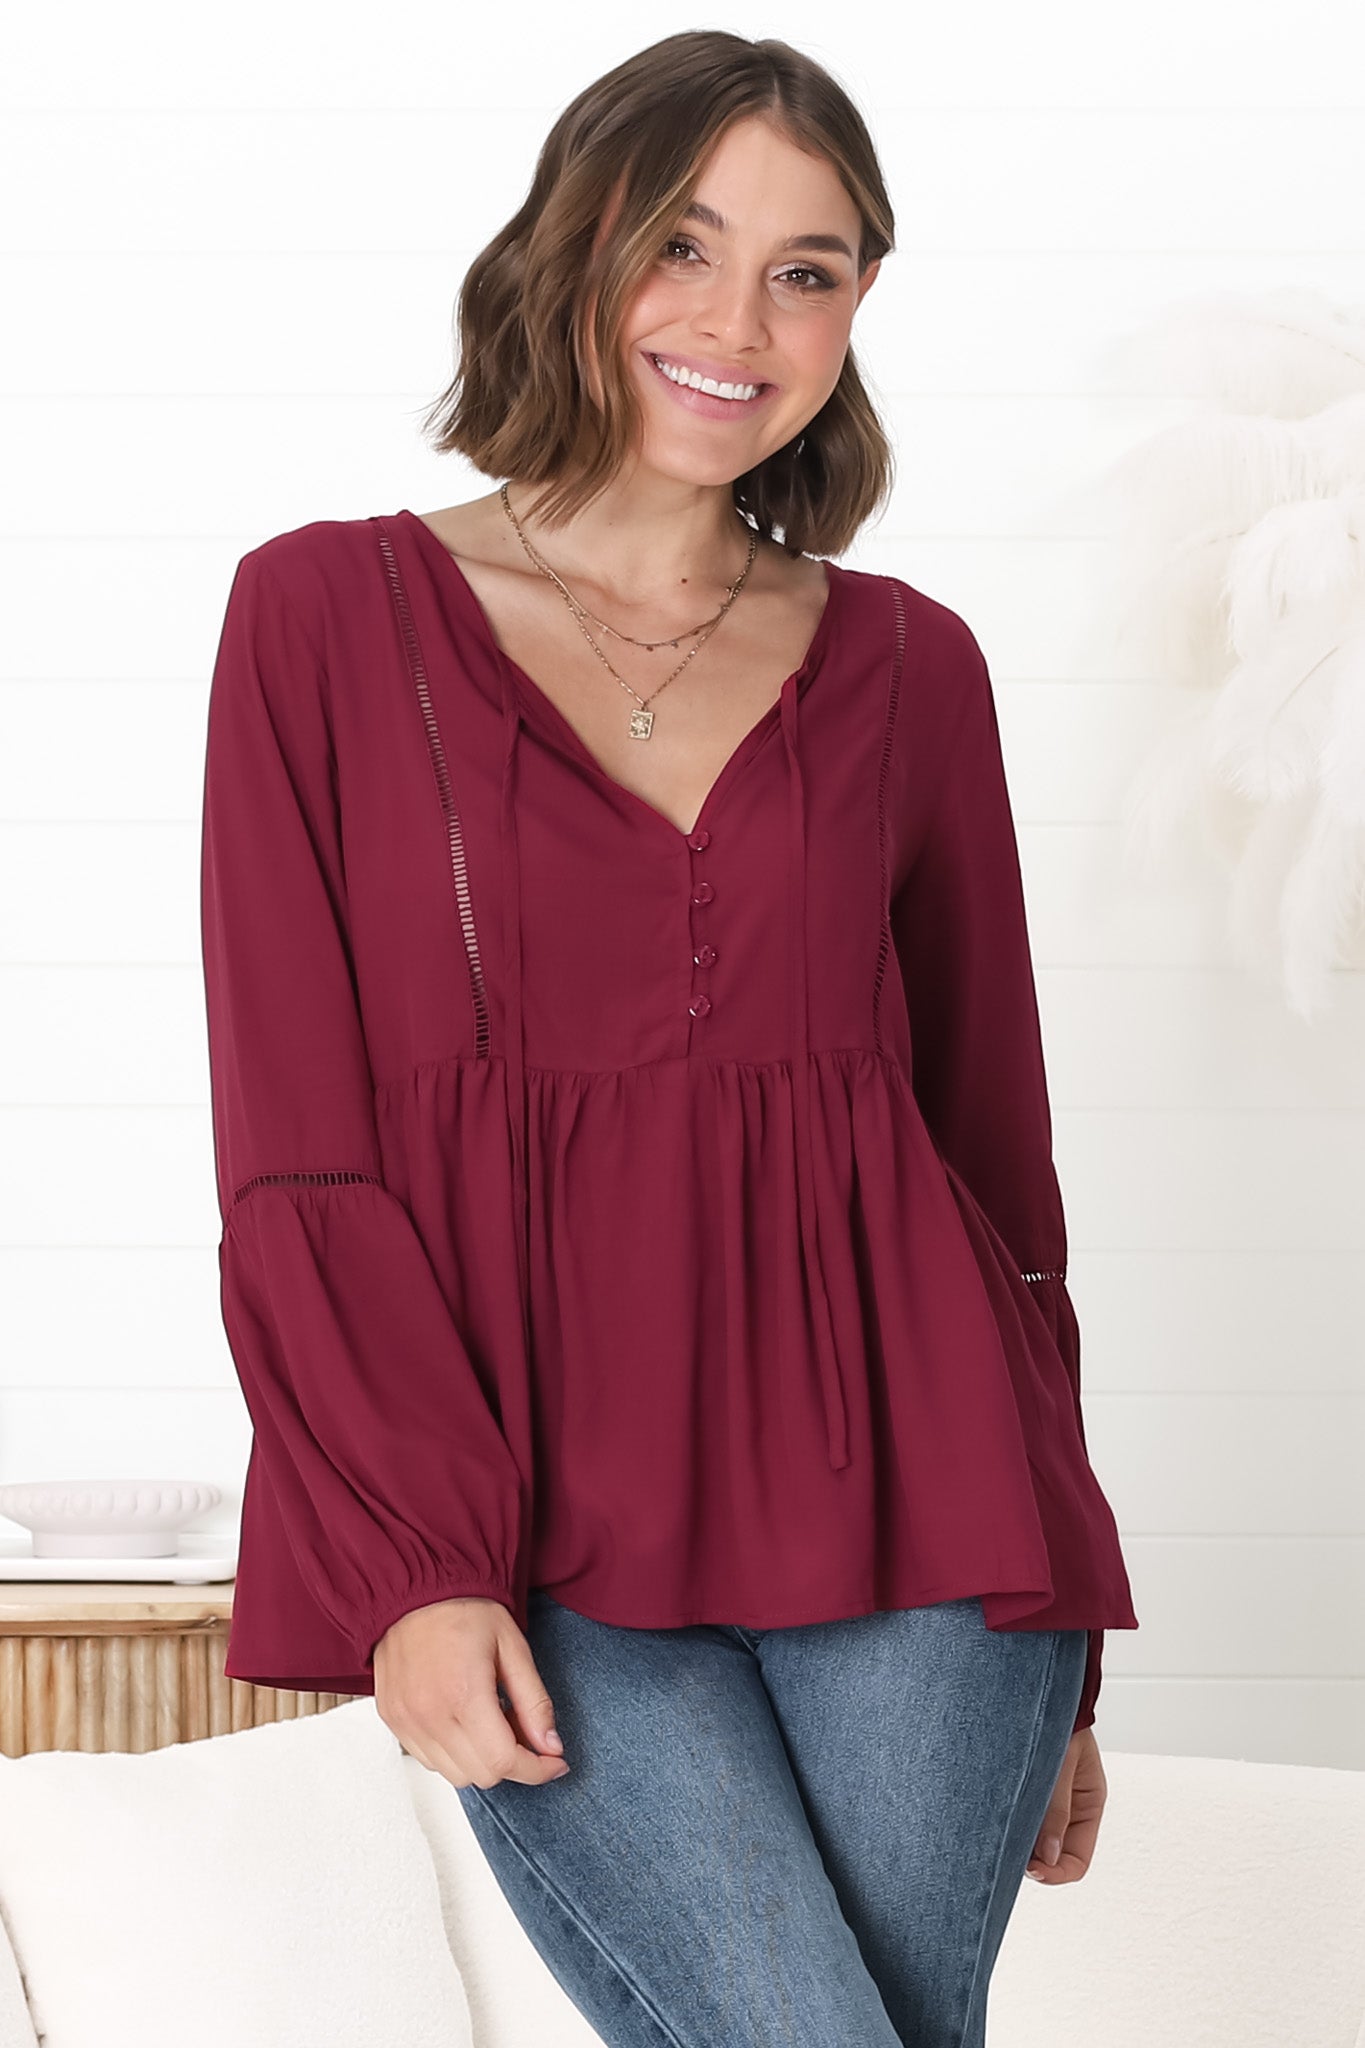 Alexia Top - V Neck Smock Top with Crochet Insert Details in Wine